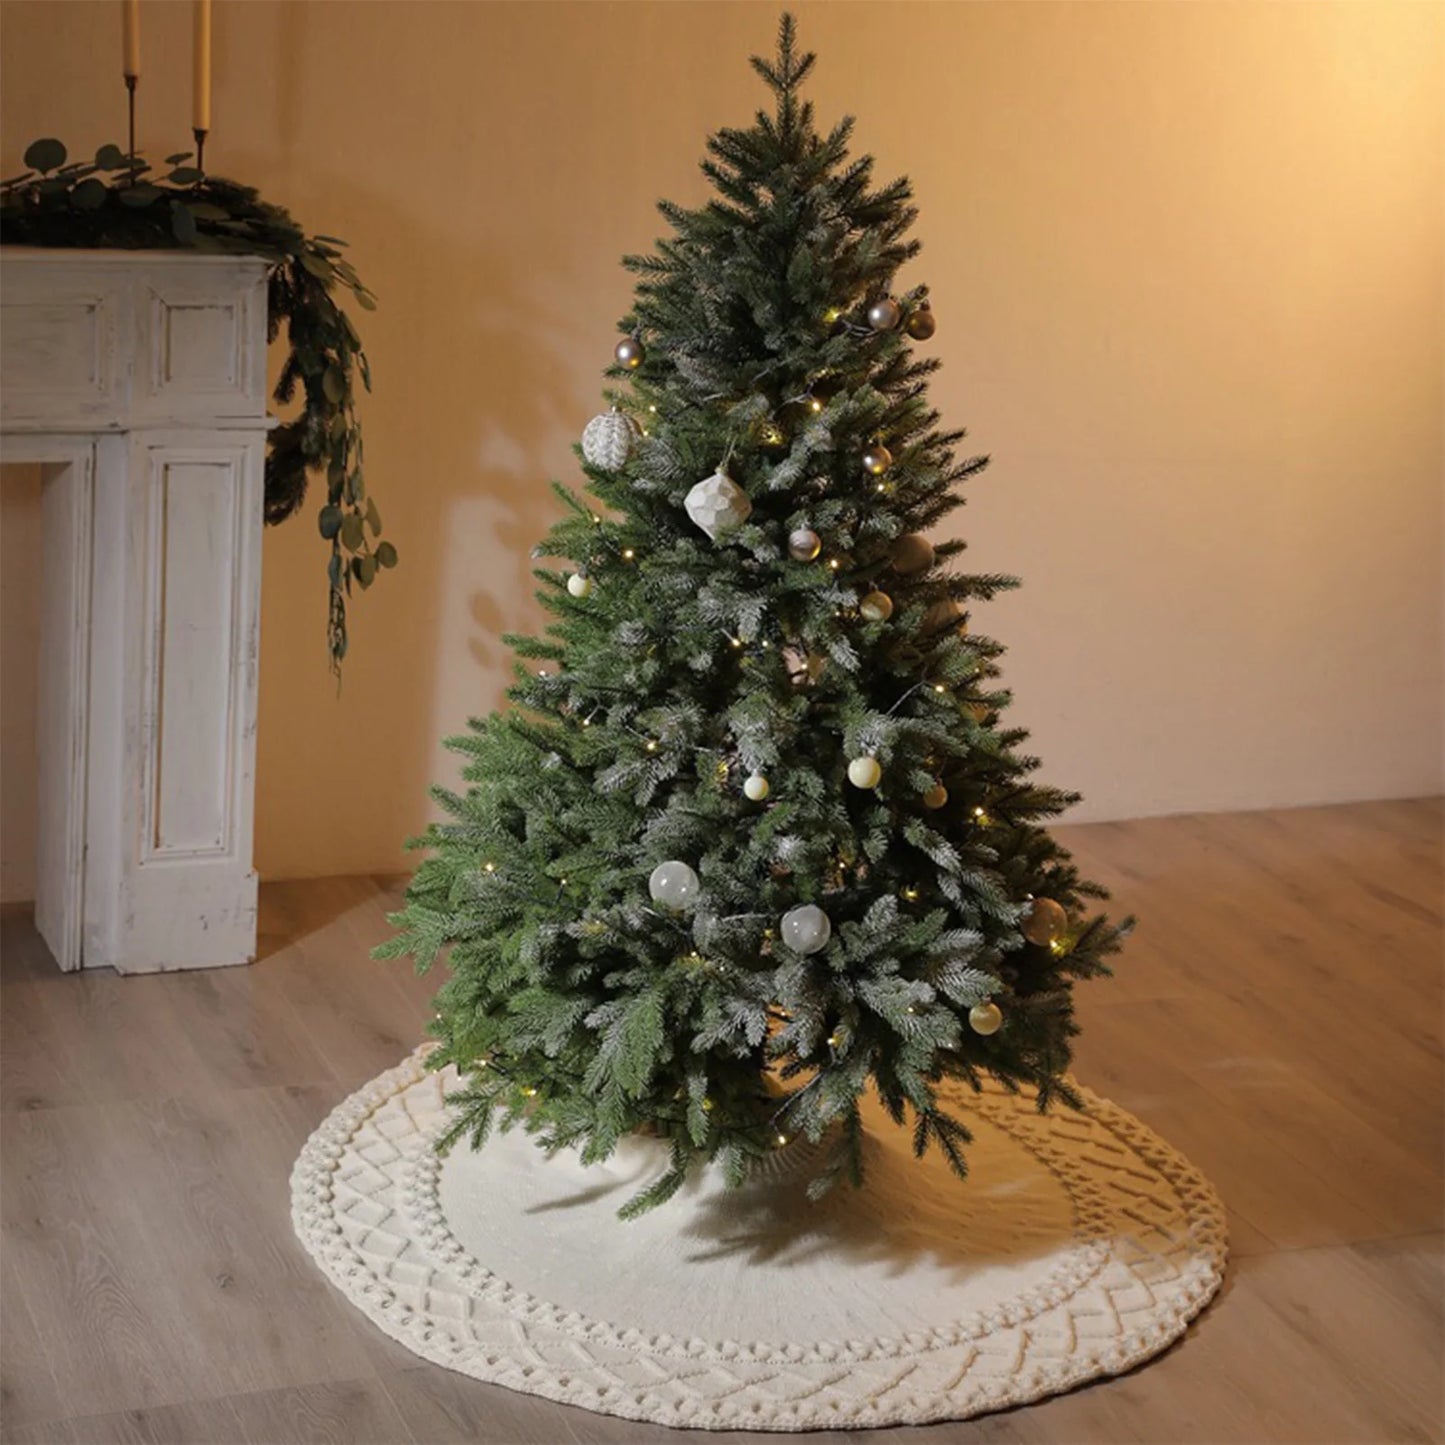 Rustic Knitted Christmas Tree Skirt